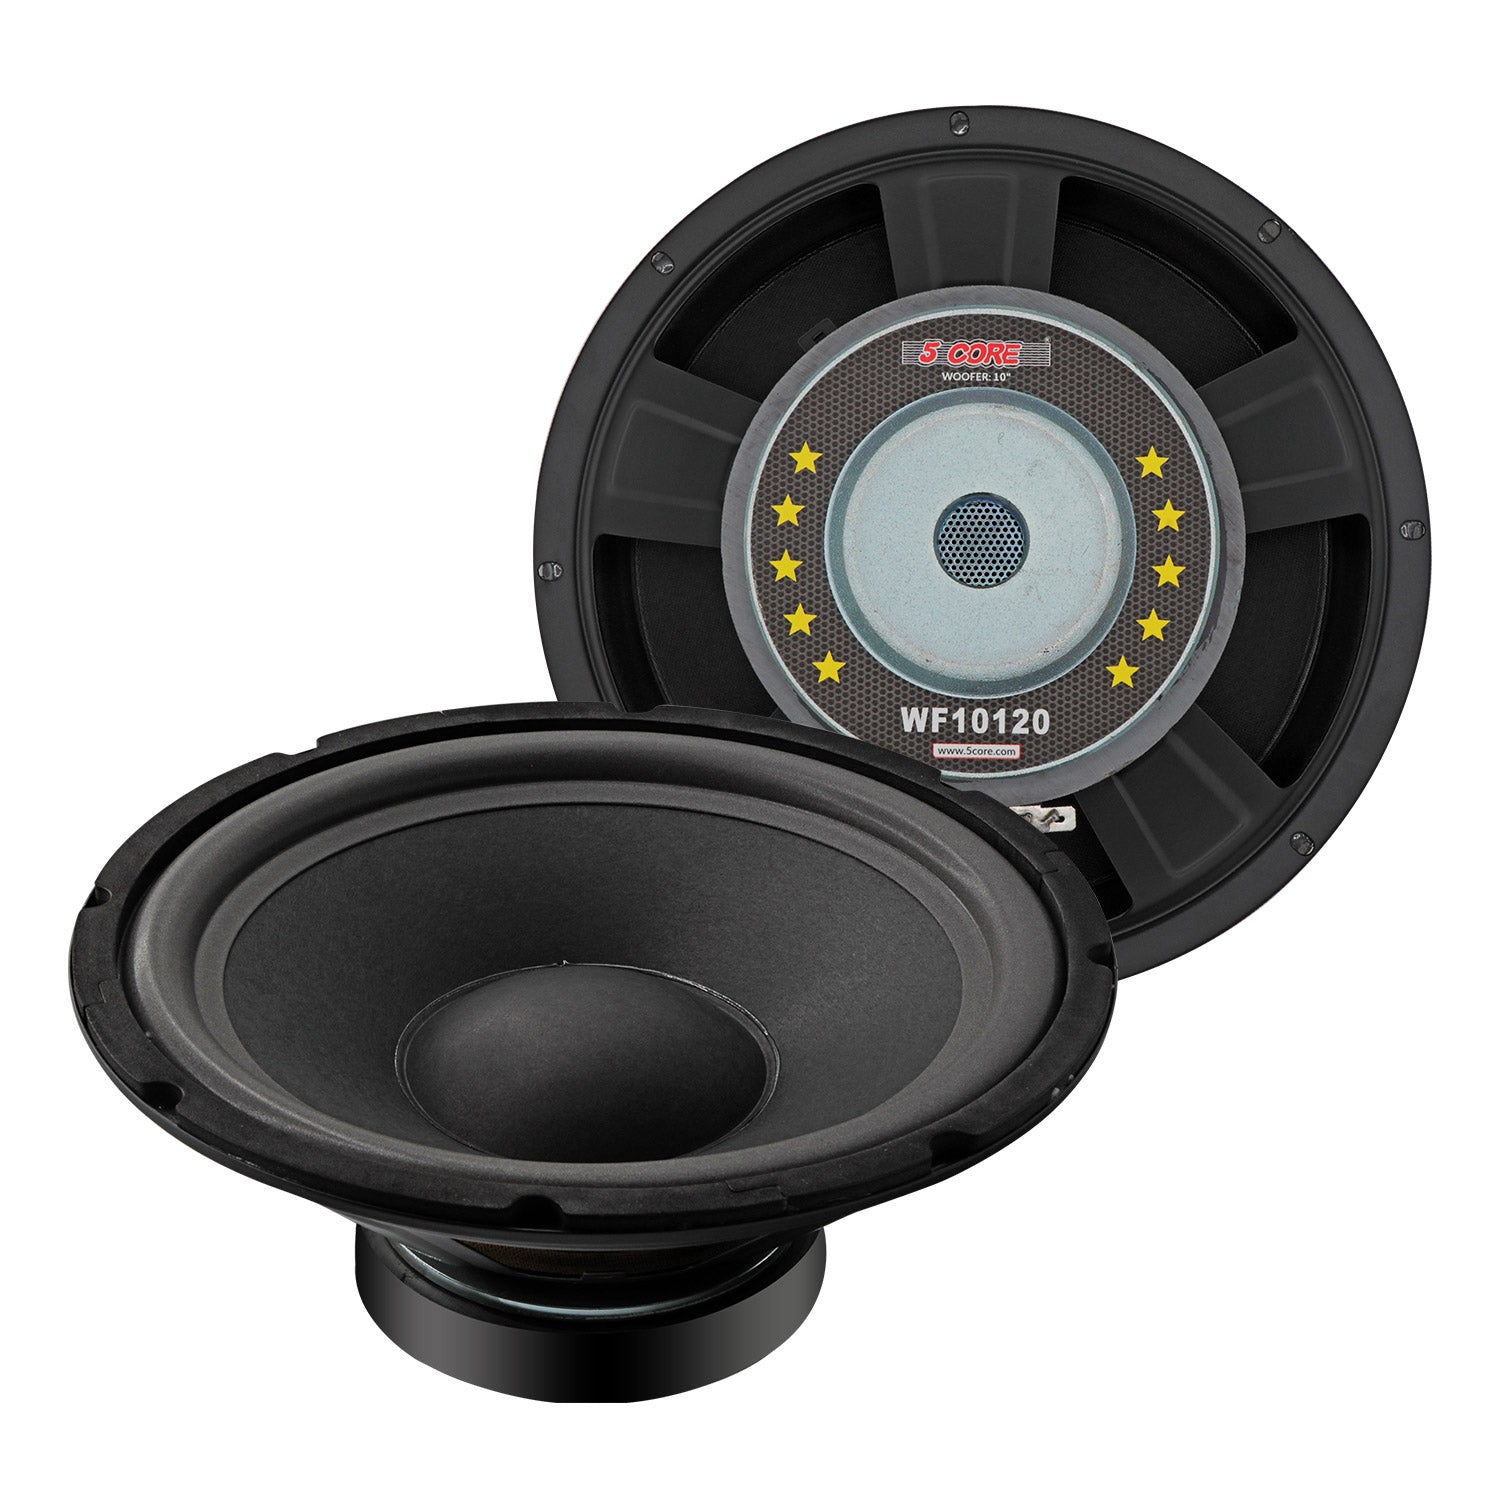 5 Core 10 Inch Subwoofer Speaker 750W Peak 4 Ohm Replacement Car Bass Sub Woofer 23 Oz Magnet